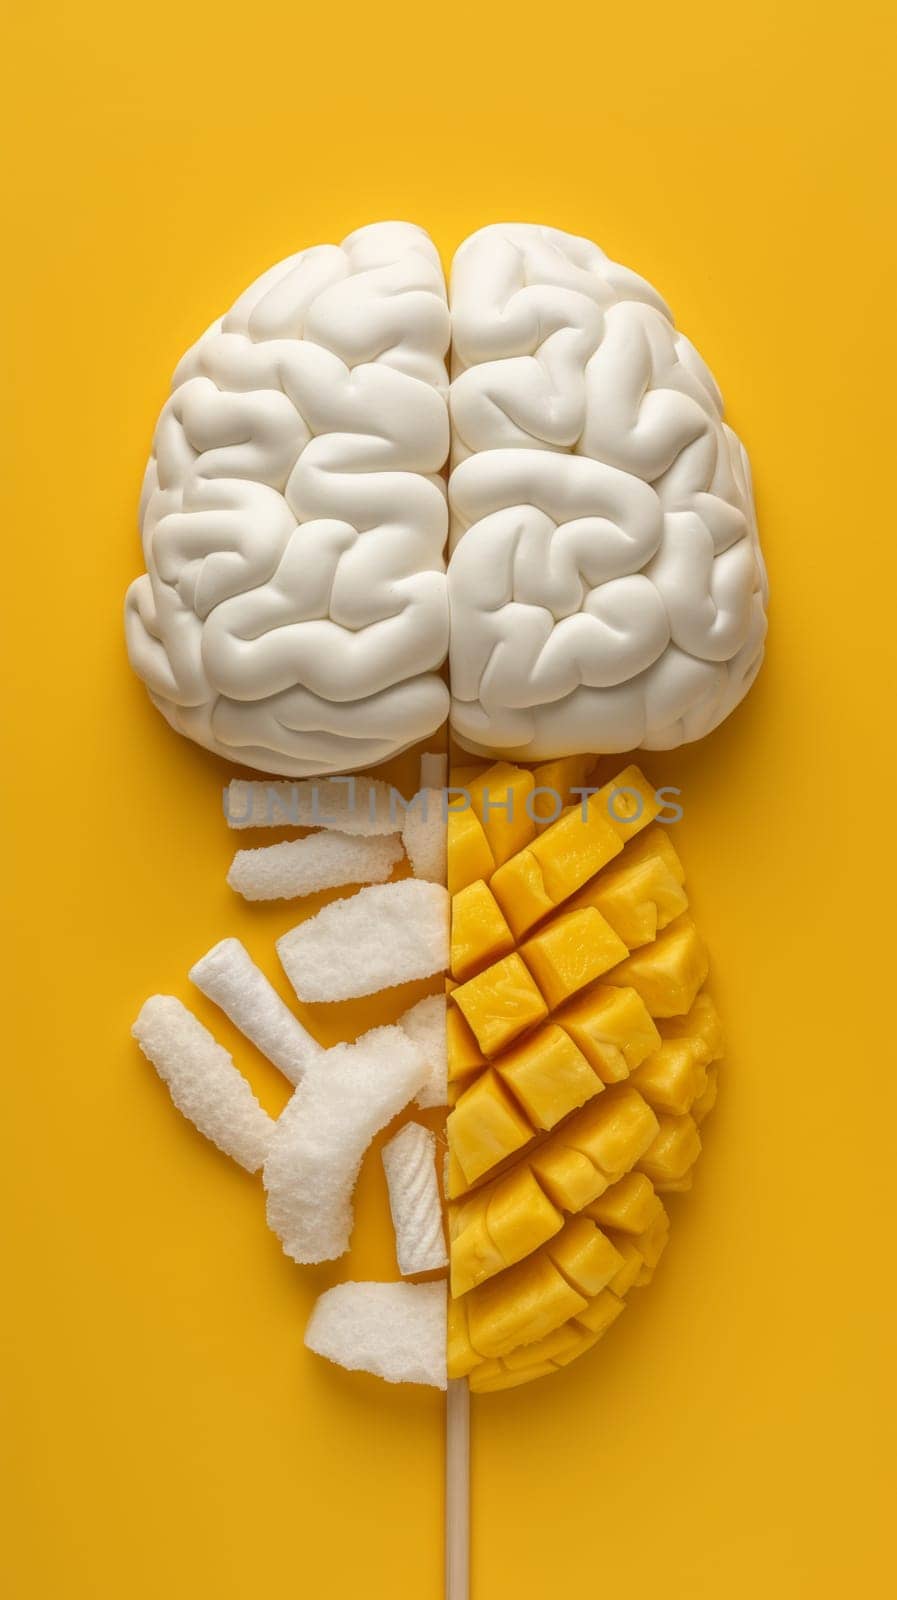 A brain and a pineapple on sticks with yellow background